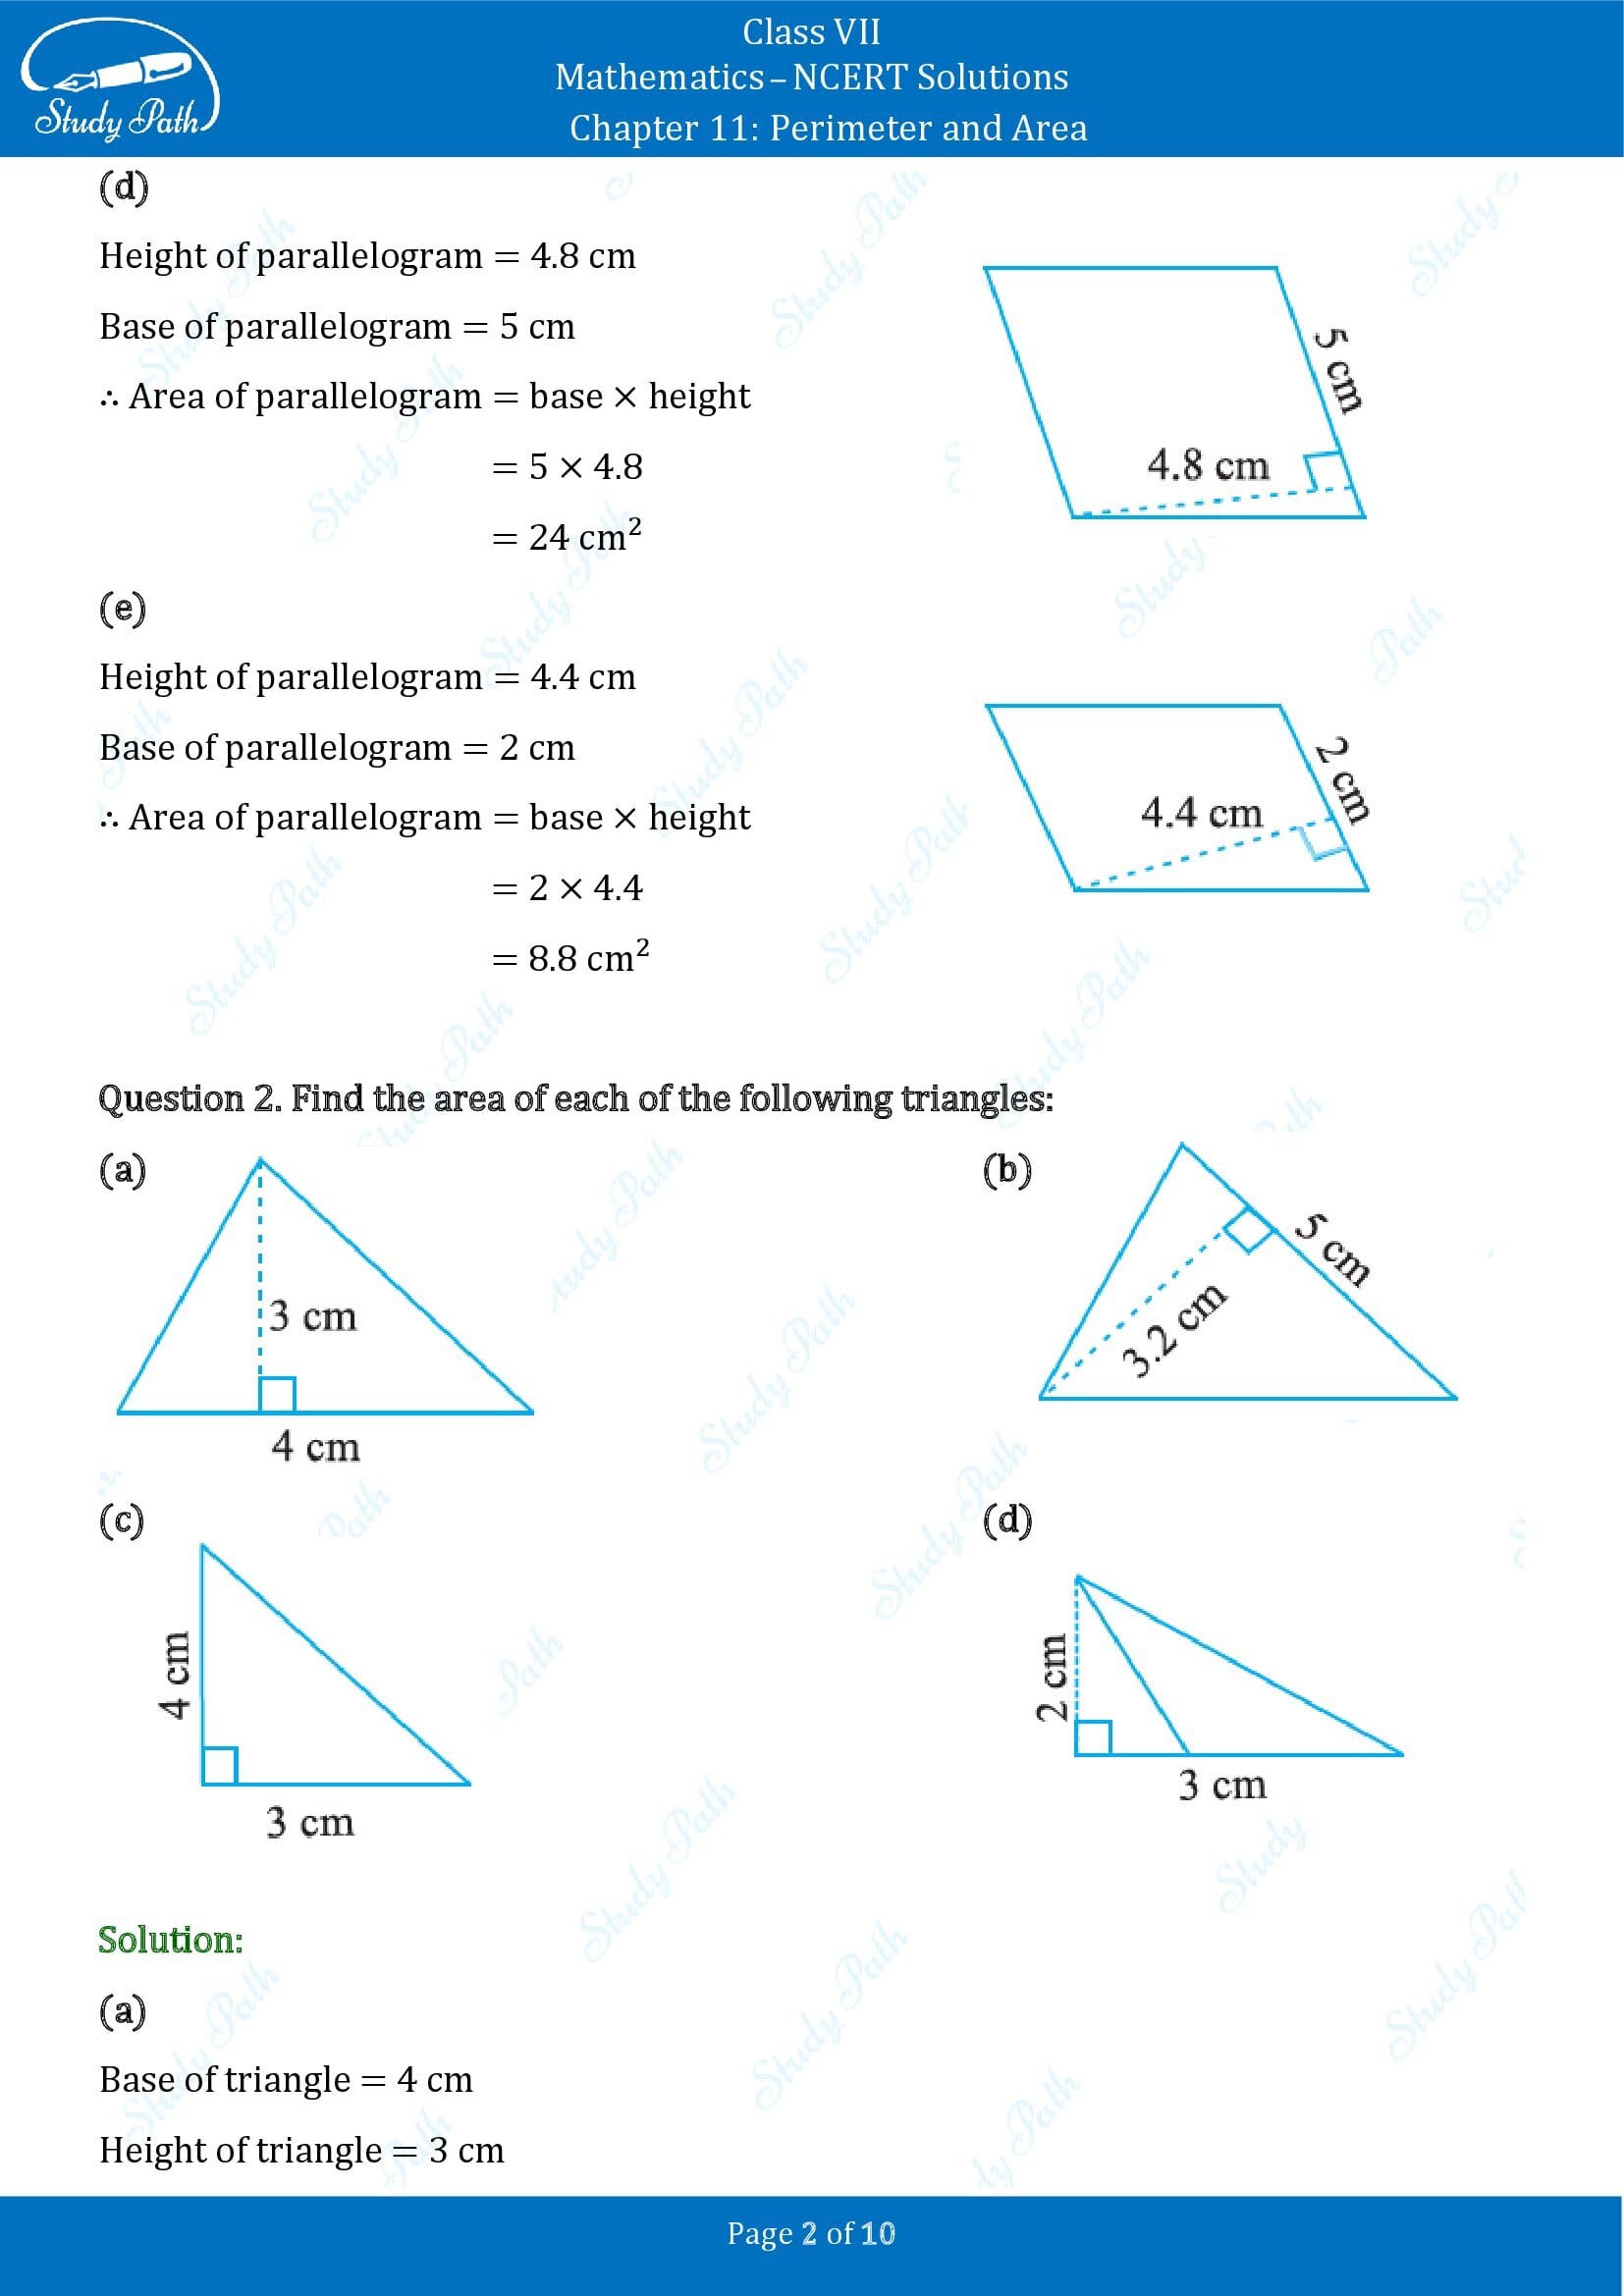 NCERT Solutions for Class 7 Maths Chapter 11 Perimeter and Area Exercise 11.2 00002